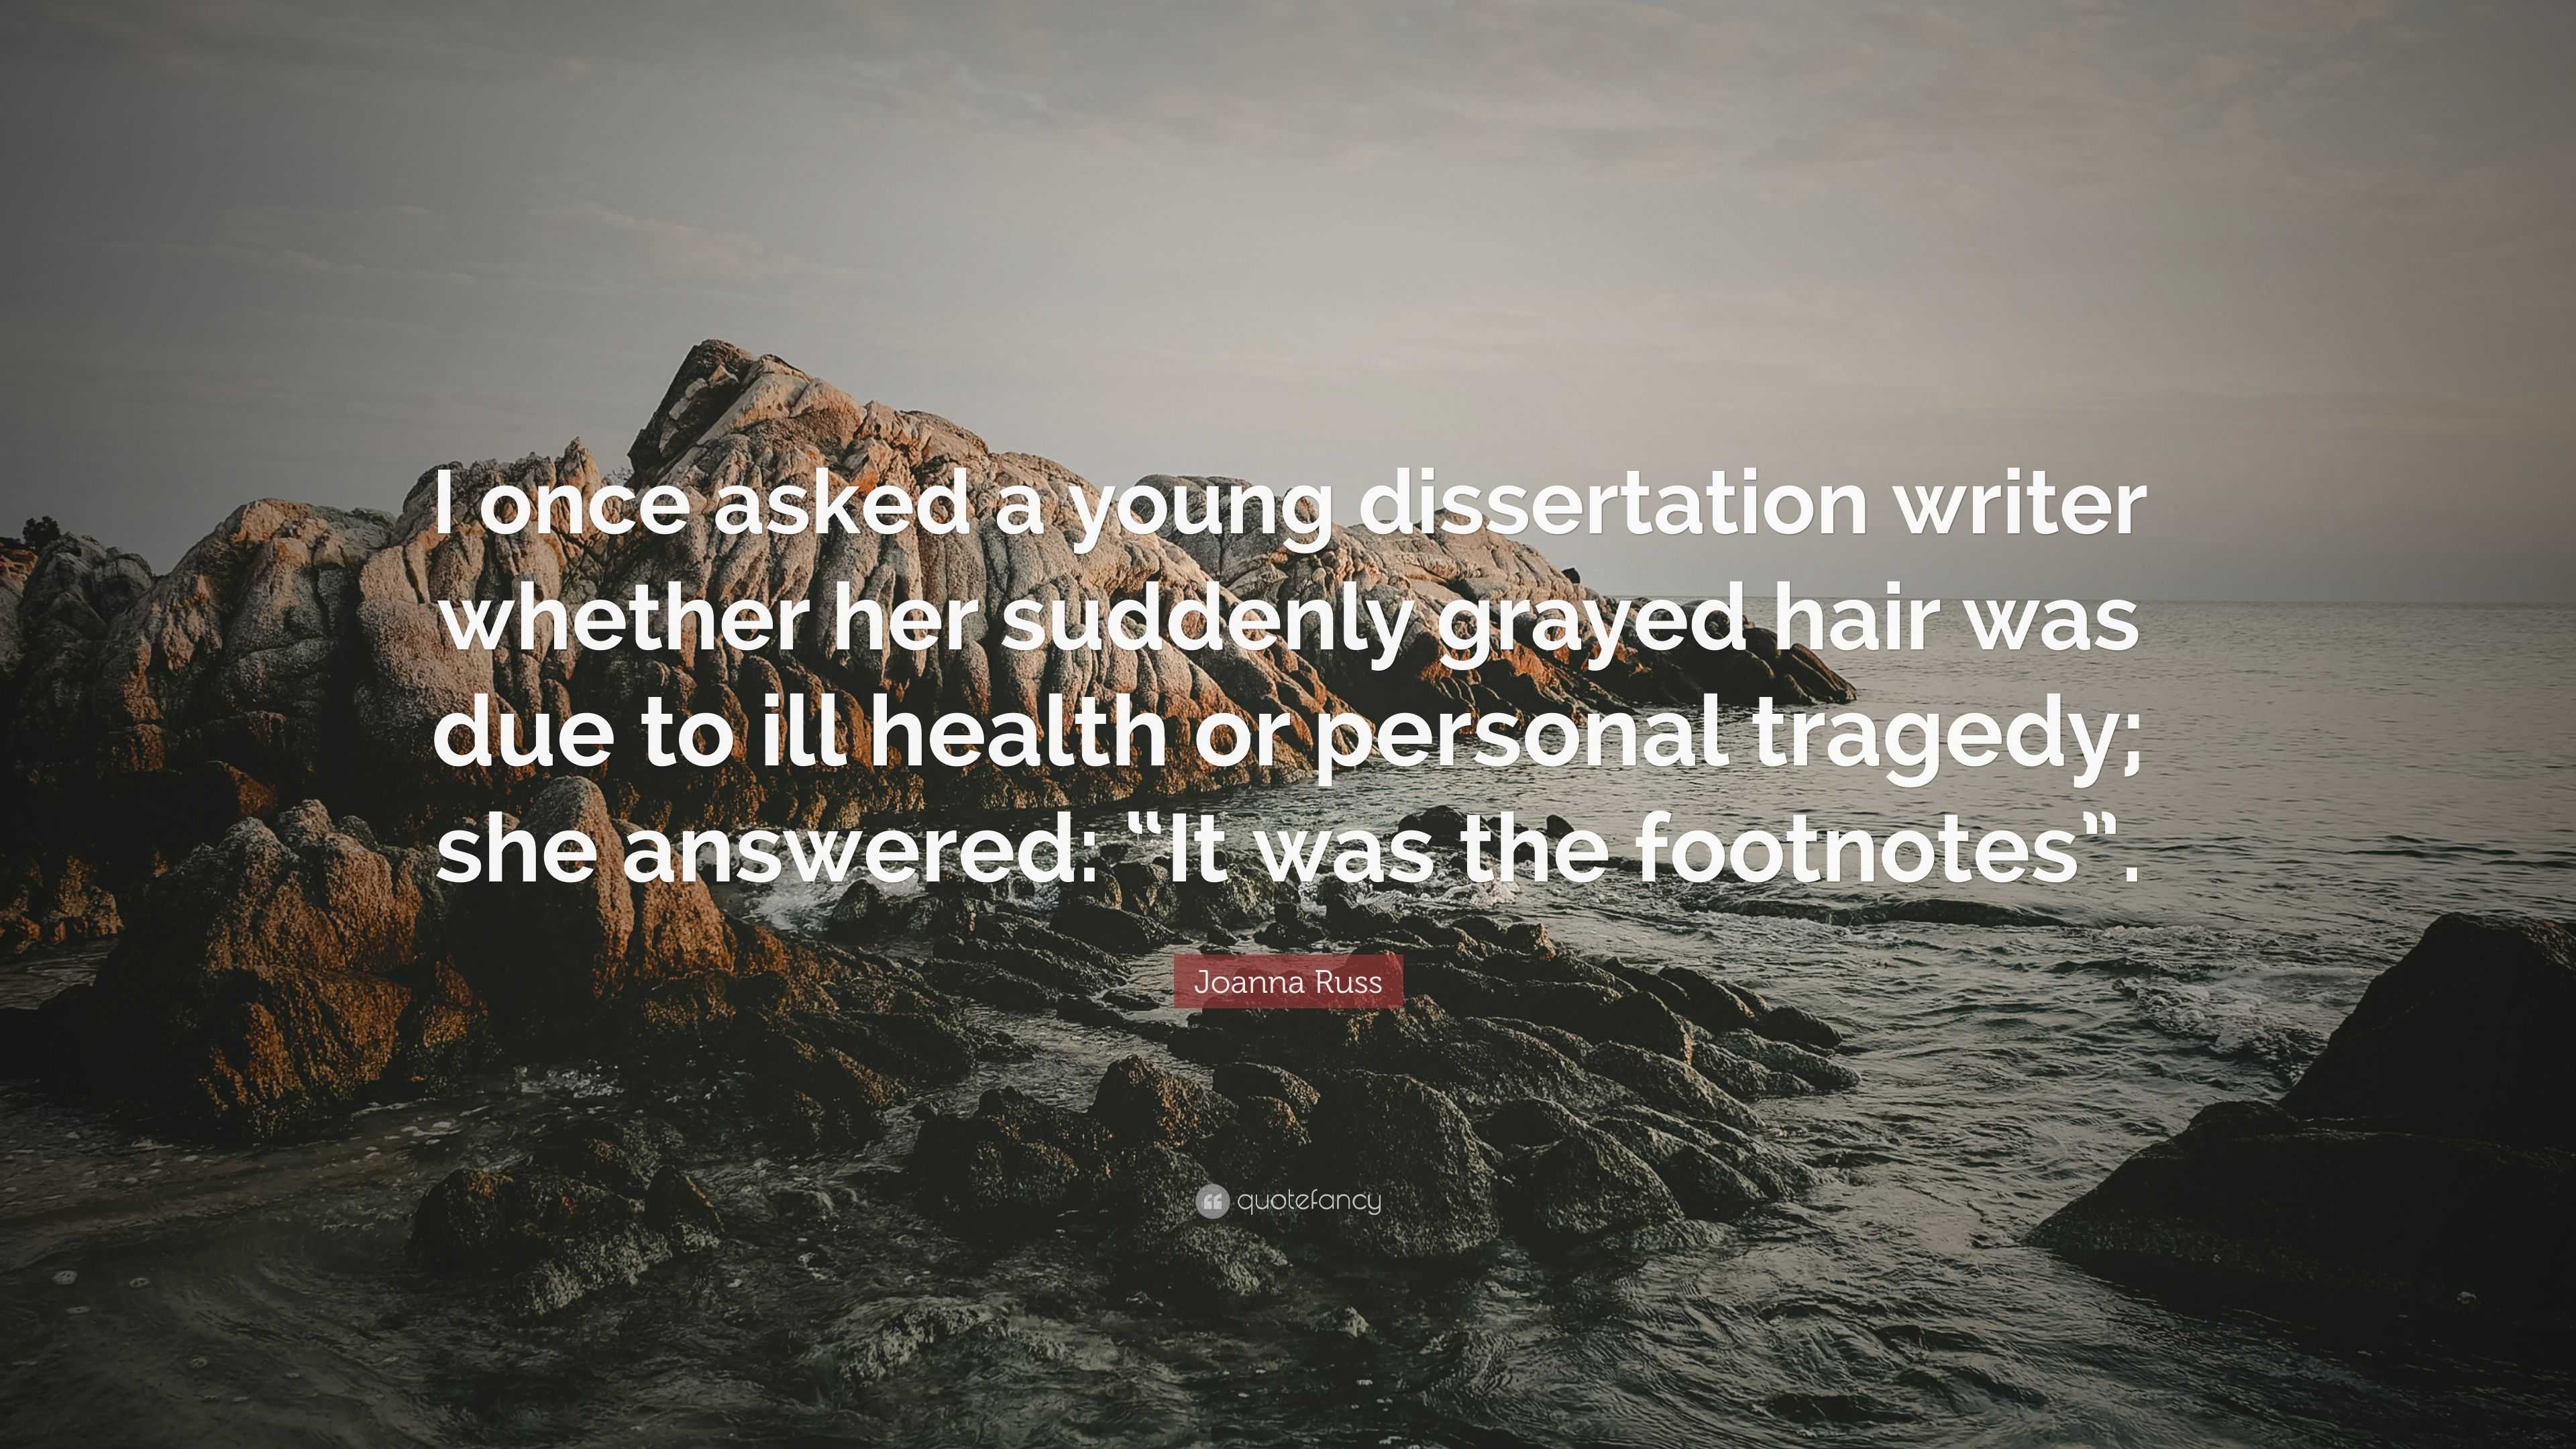 Joanna Russ Quote: "I once asked a young dissertation writer whether her suddenly grayed hair ...